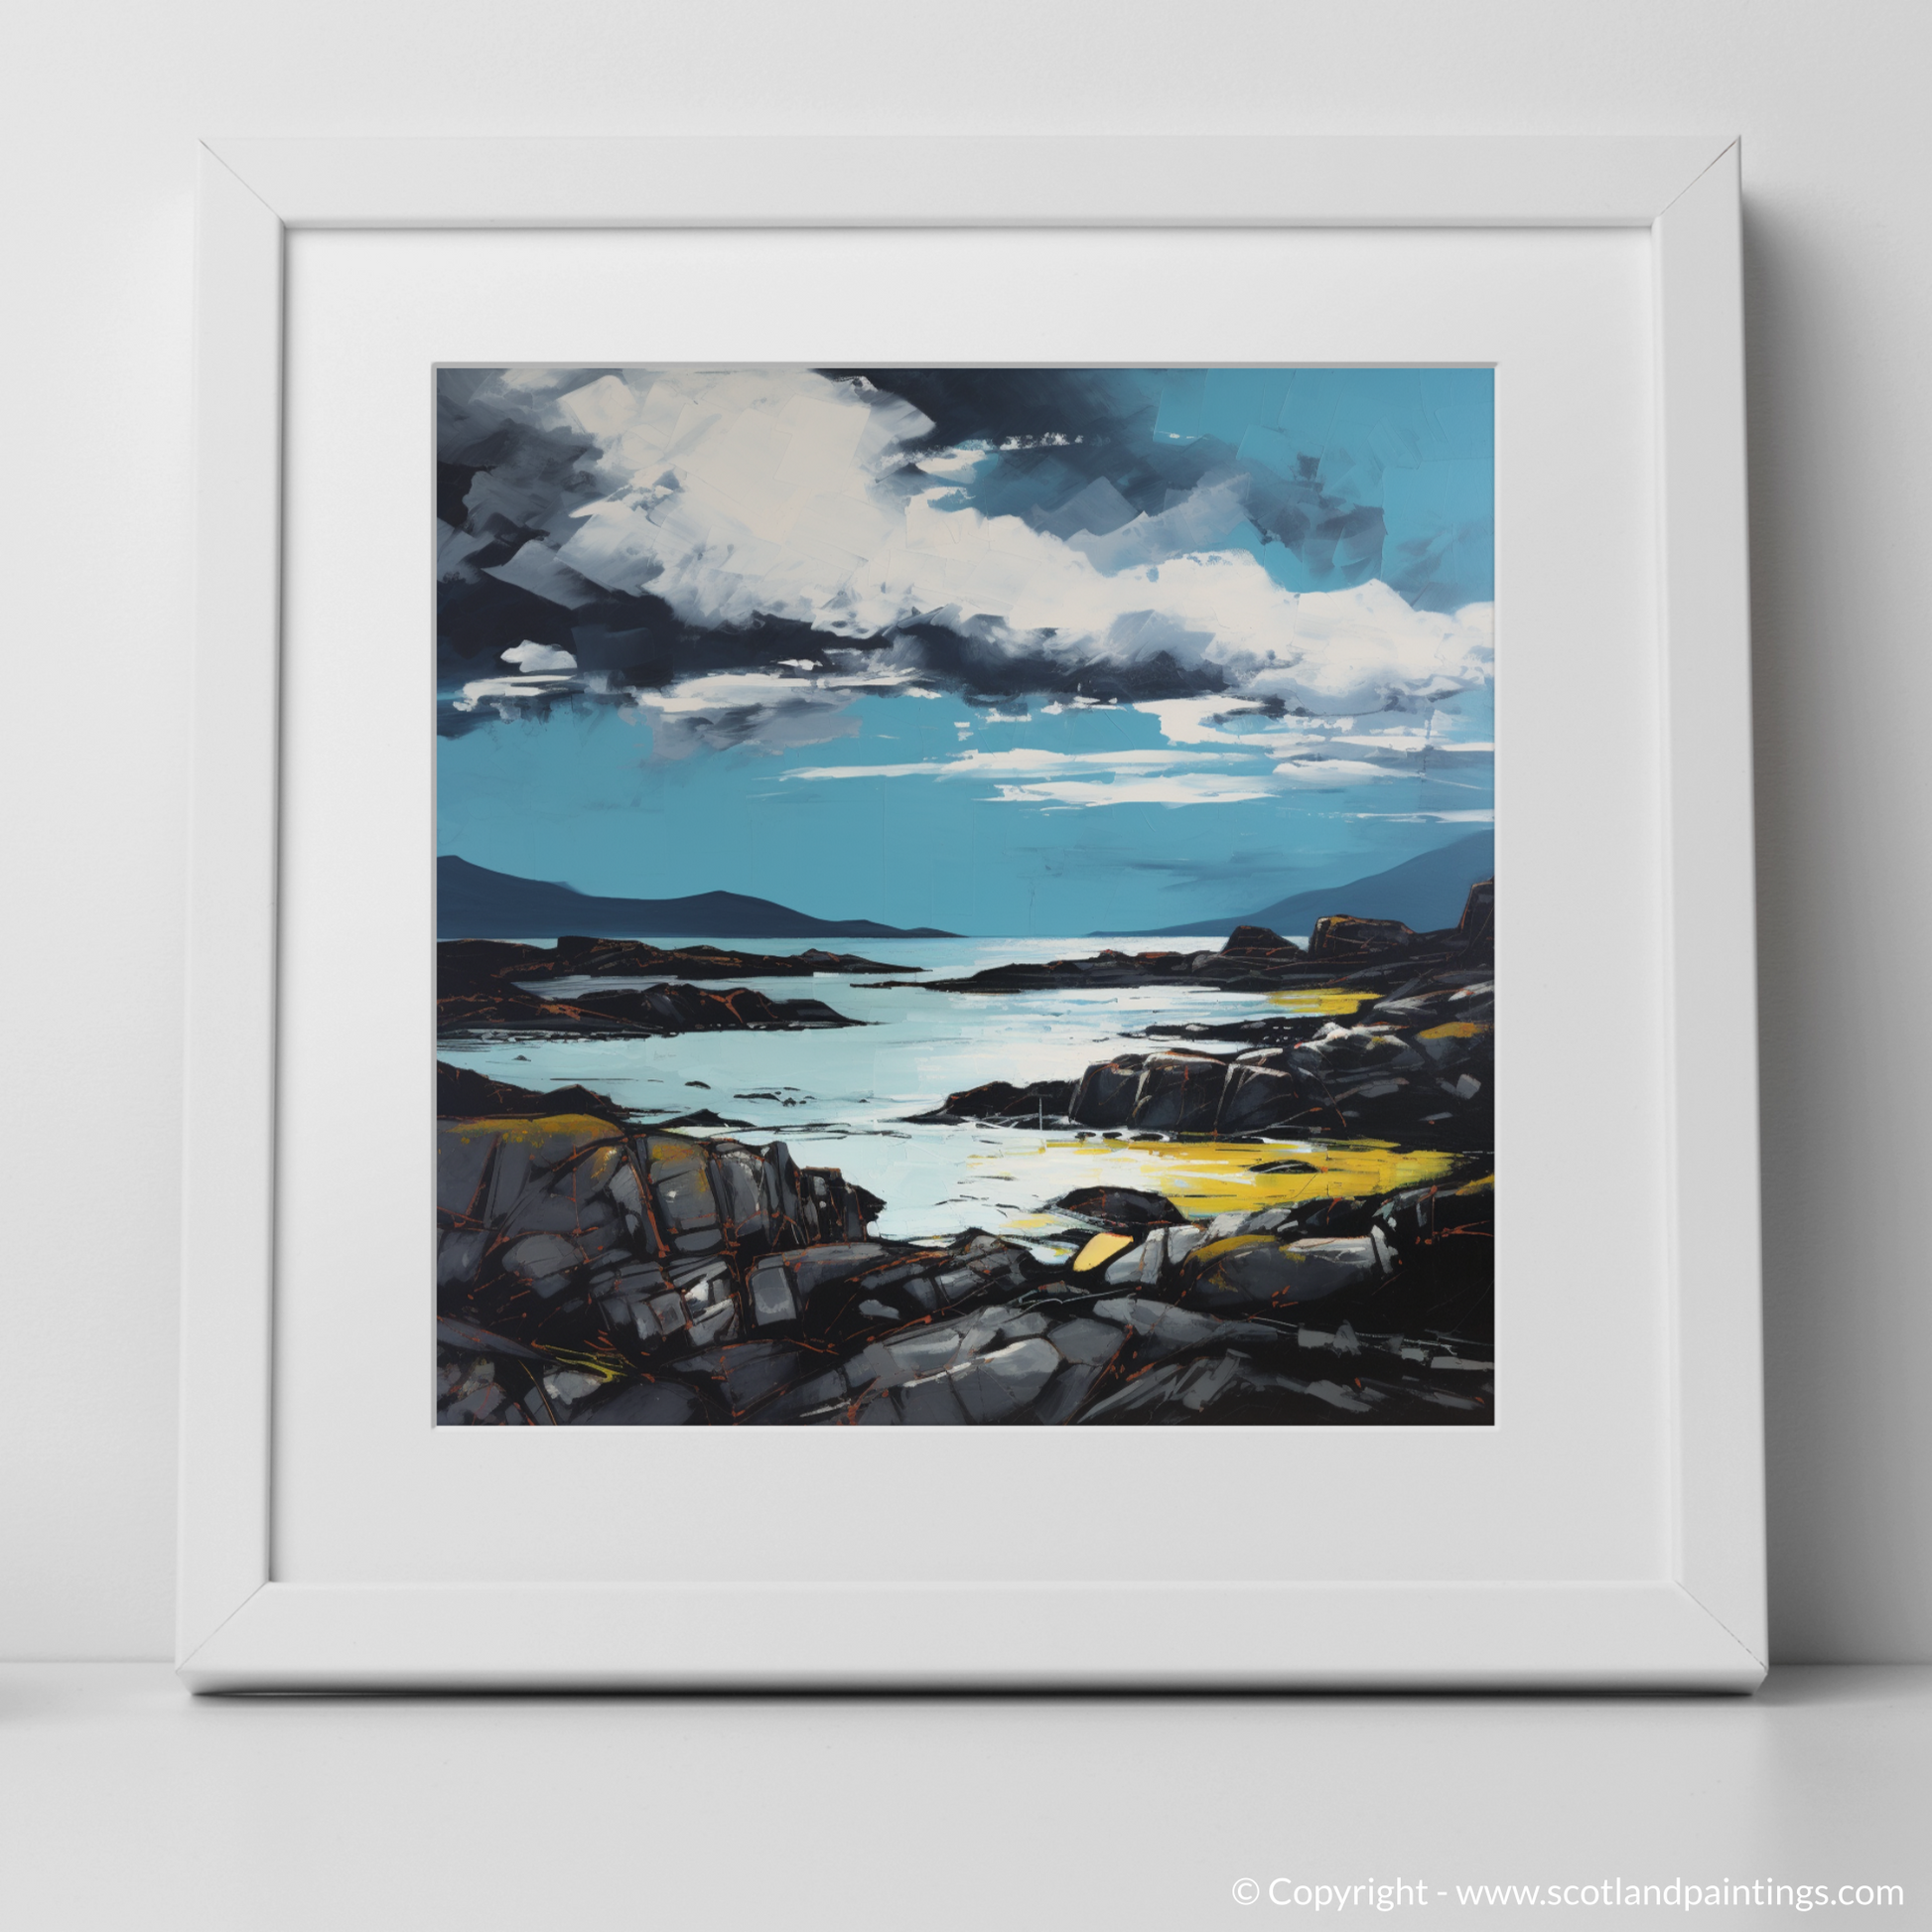 Art Print of Isle of Harris, Outer Hebrides with a white frame